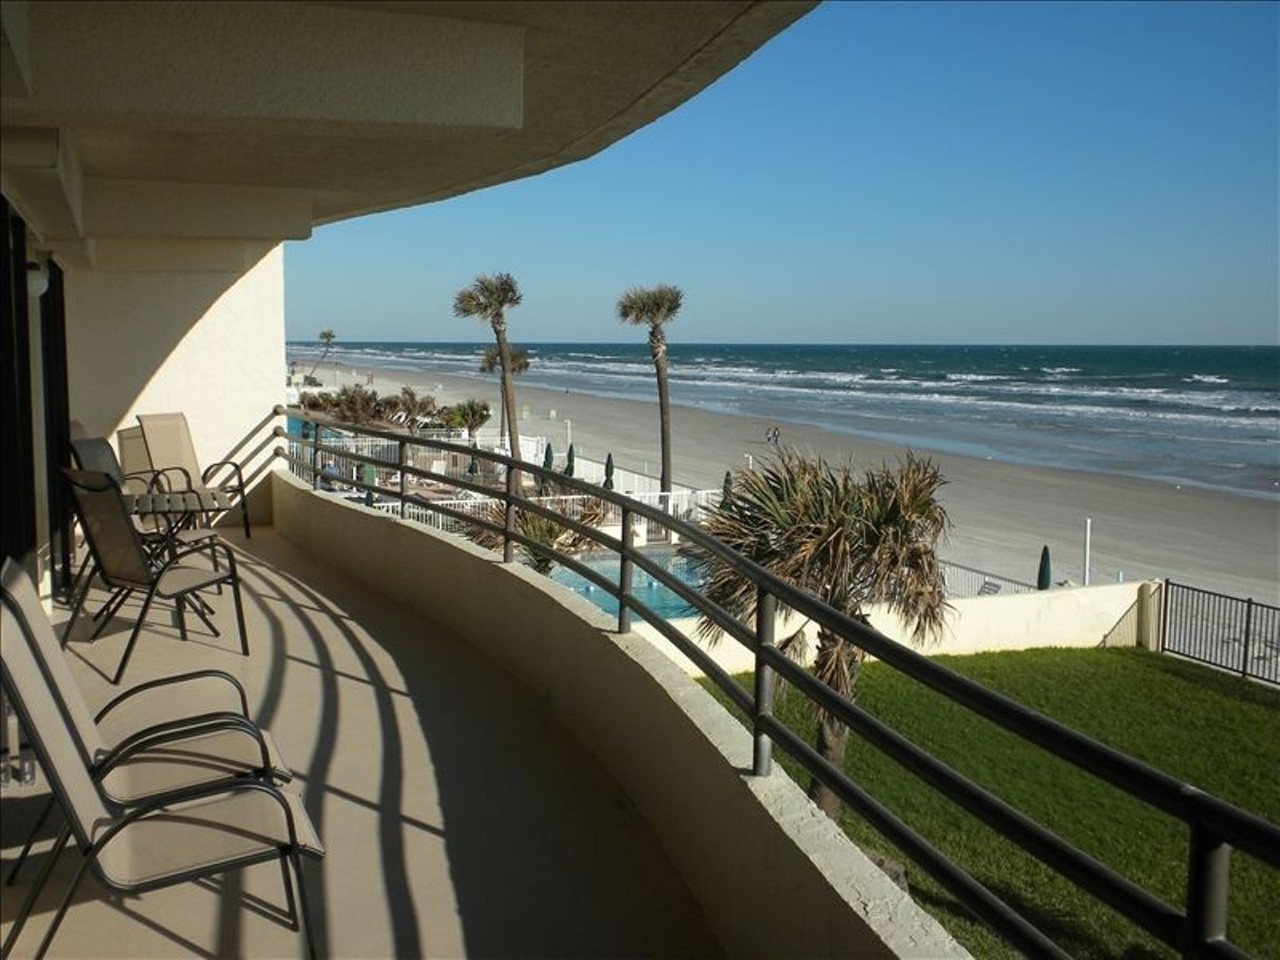  Stay at this three-bedroom beachfront condo in Daytona
Average night $95 
3 bedrooms
If your whole posse is coming for vacation (or if you have fussy friends), there are plenty of beds to keep everyone happy.